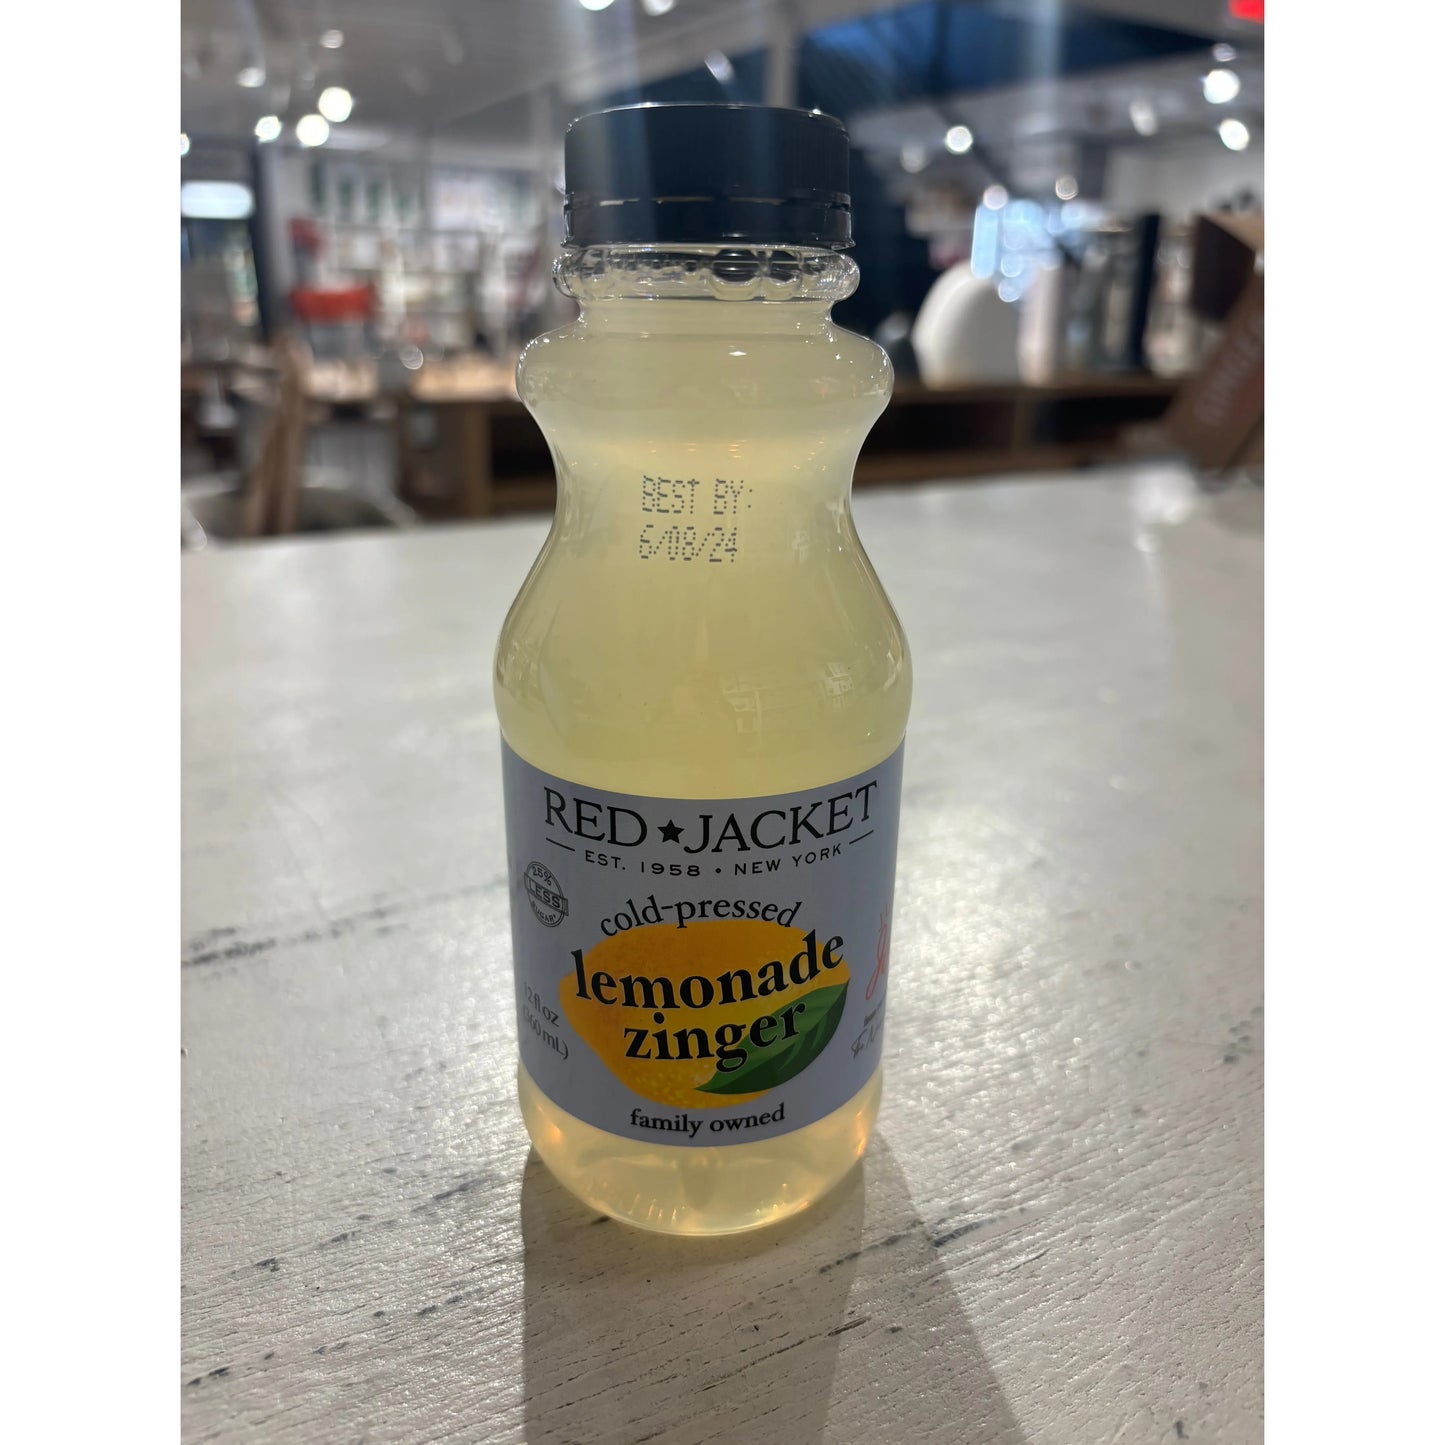 A bottle of Westerlind Cold Pressed Lemonade Zinger on a store shelf, displaying a "best by" date of 6/08/24.